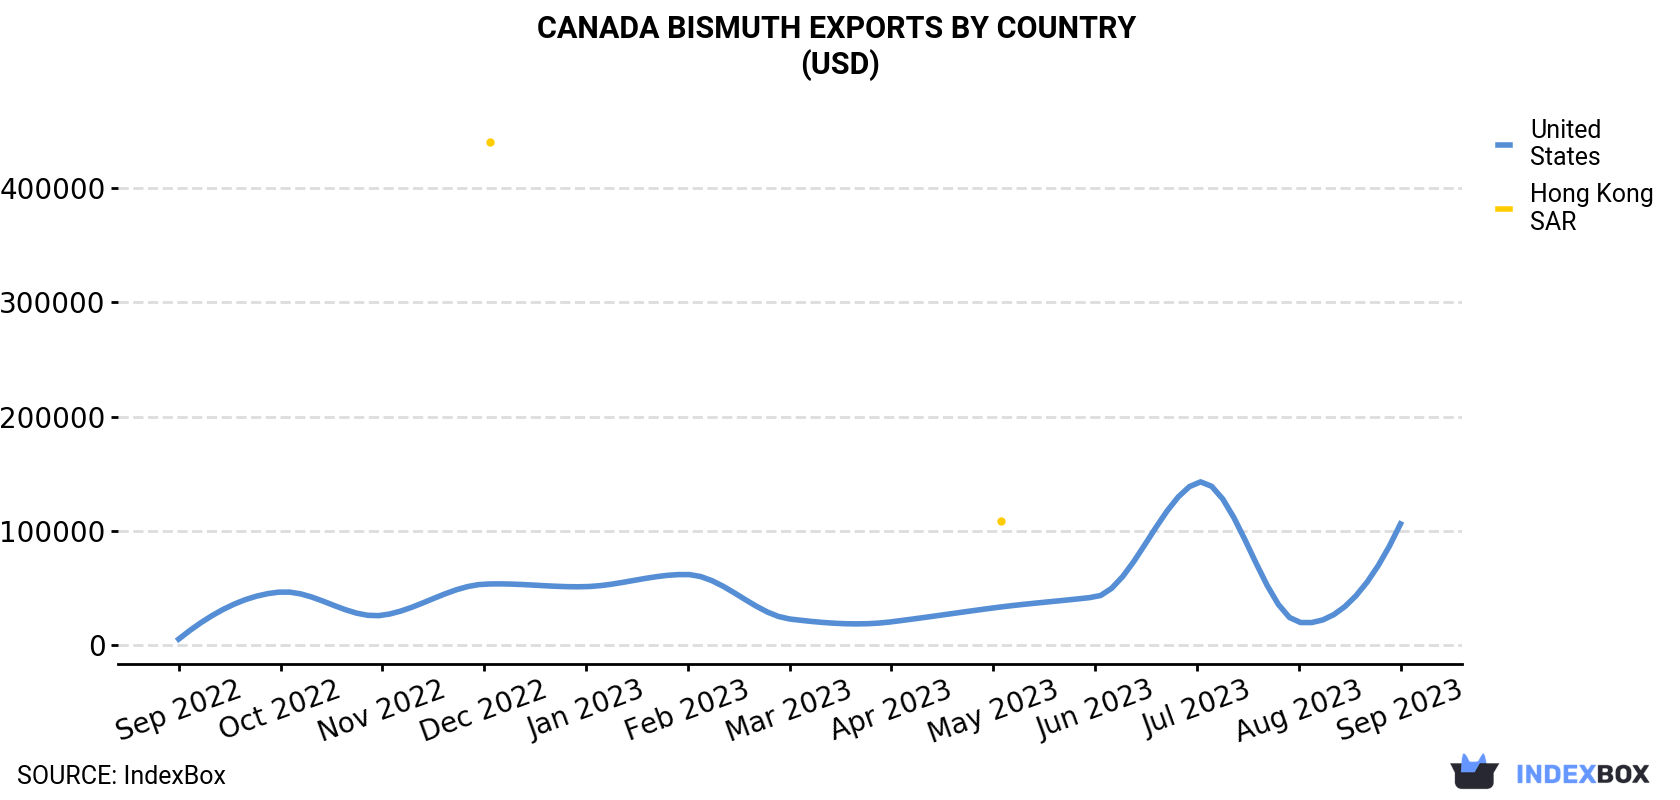 Canada Bismuth Exports By Country (USD)